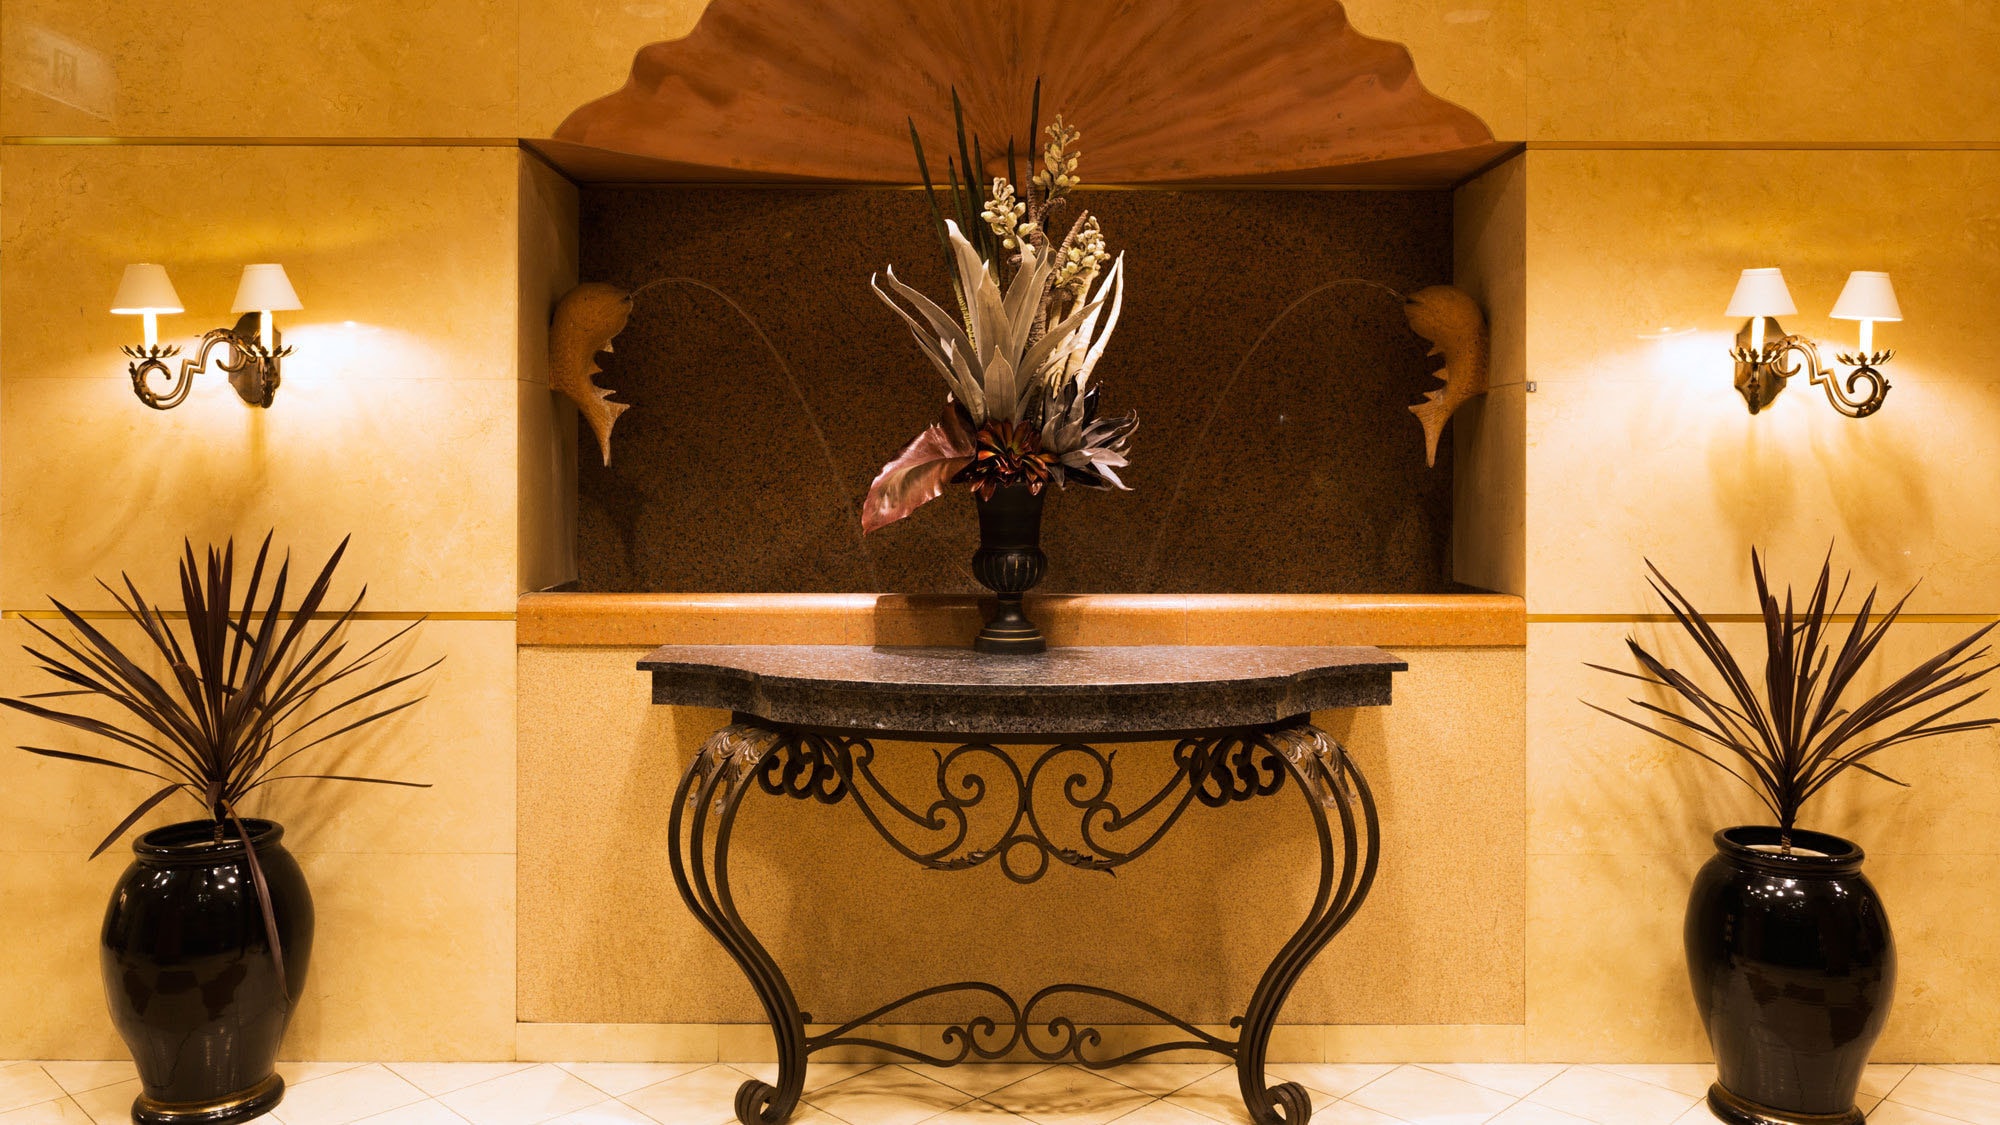 *Sophisticated design that shines everywhere in the hotel welcomes you.